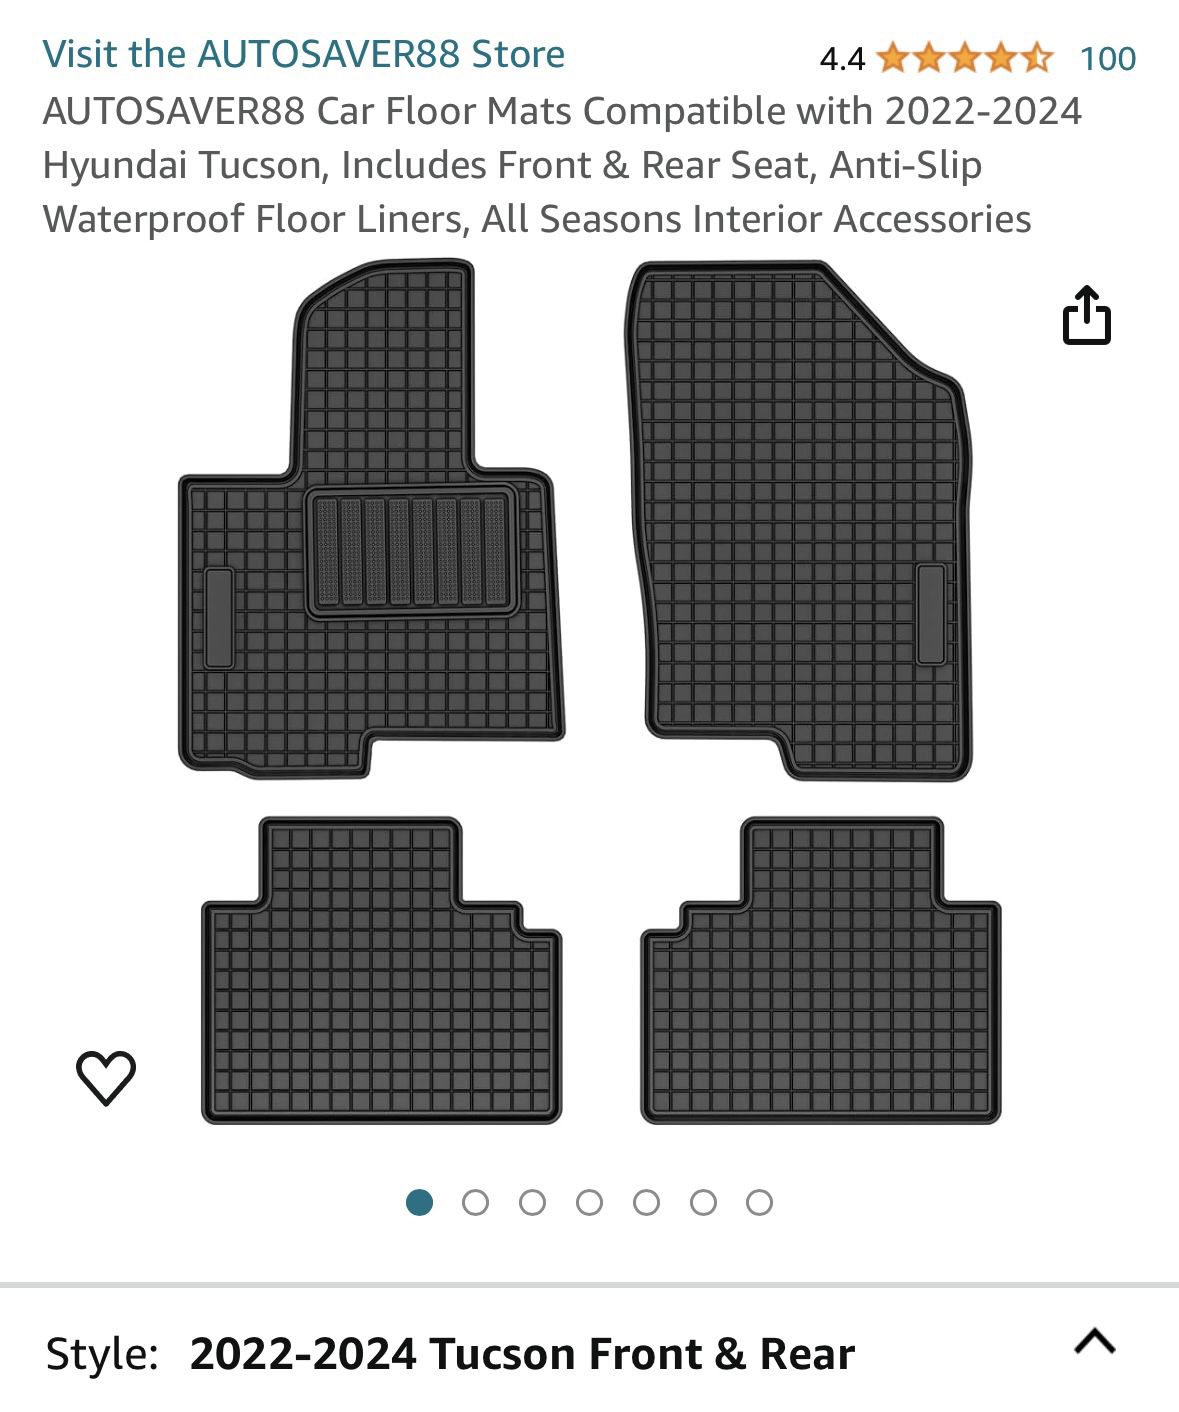 Car Floor Mats Compatible with 2022-2024 Hyundai Tucson, Includes Front & Rear Seat, Anti-Slip Waterproof Floor Liners, All Seasons Interior Accessori